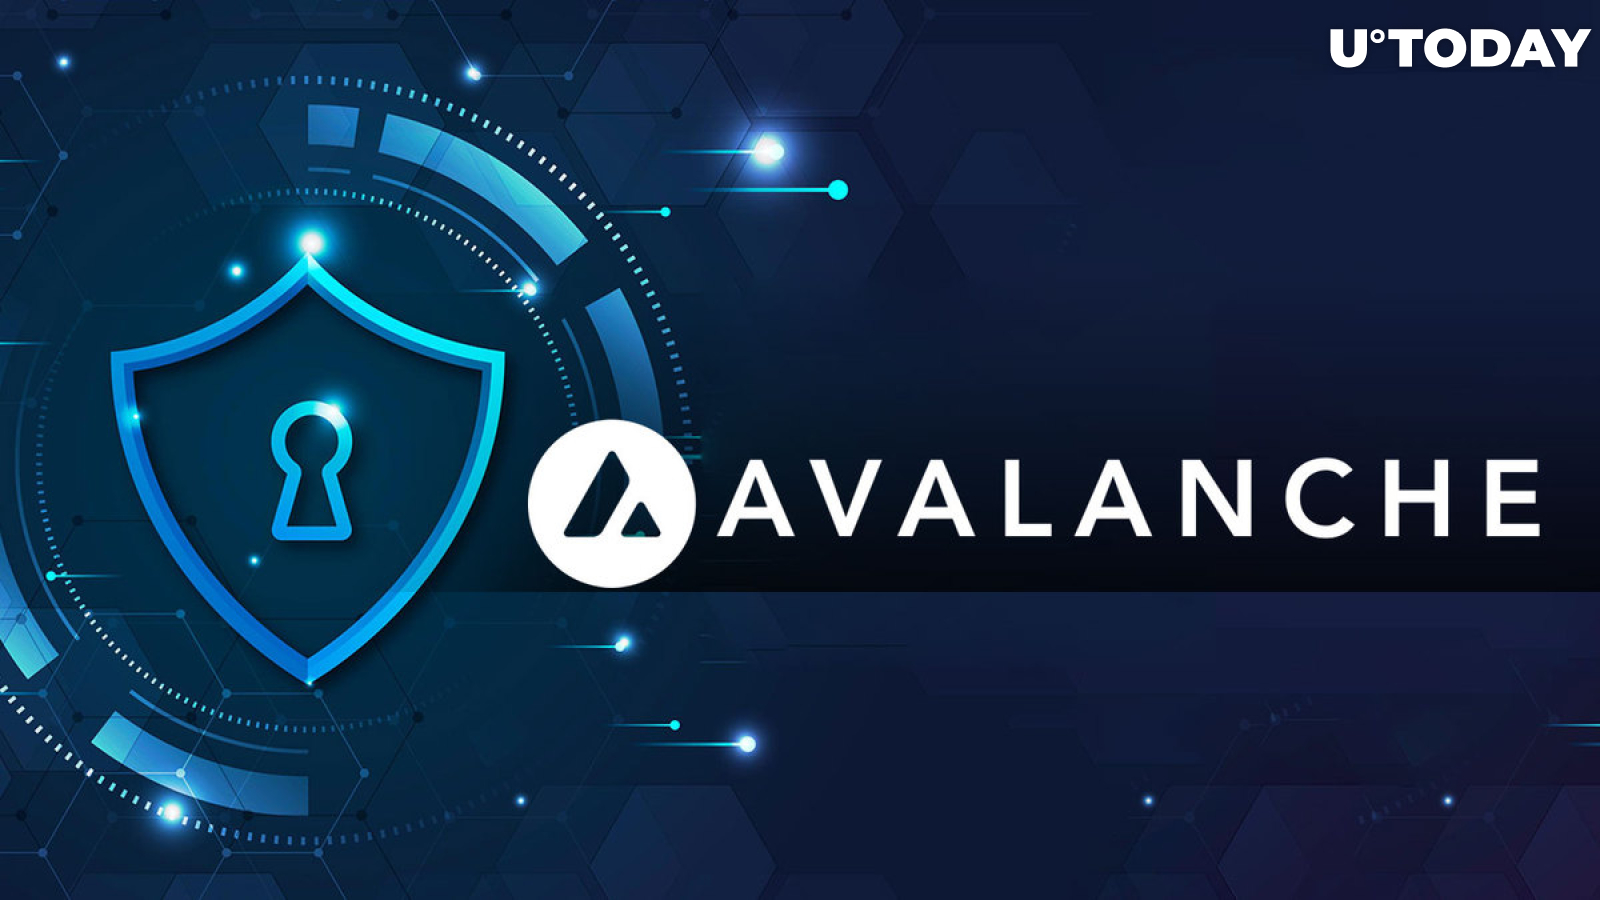 Avalanche (AVAX) Achieves Network Transaction ATH: Driving Forces Behind It